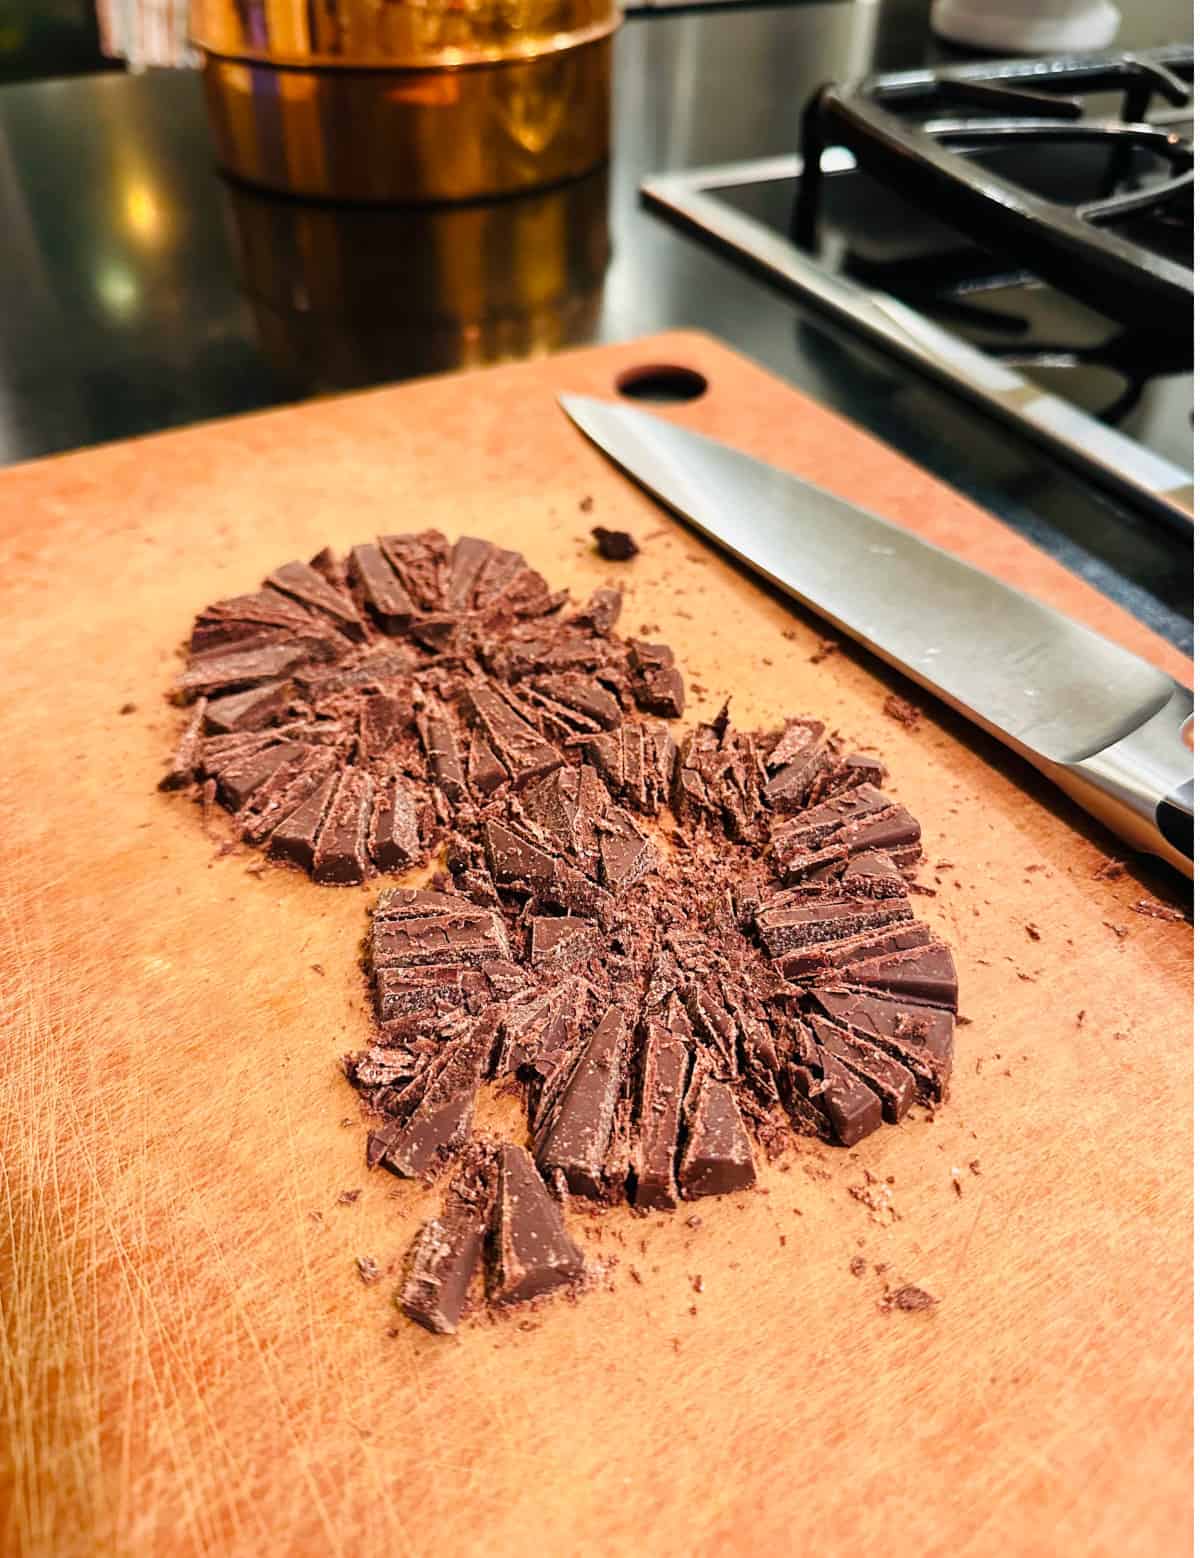 Chopped chocolate on a cutting board with a chef's knife.